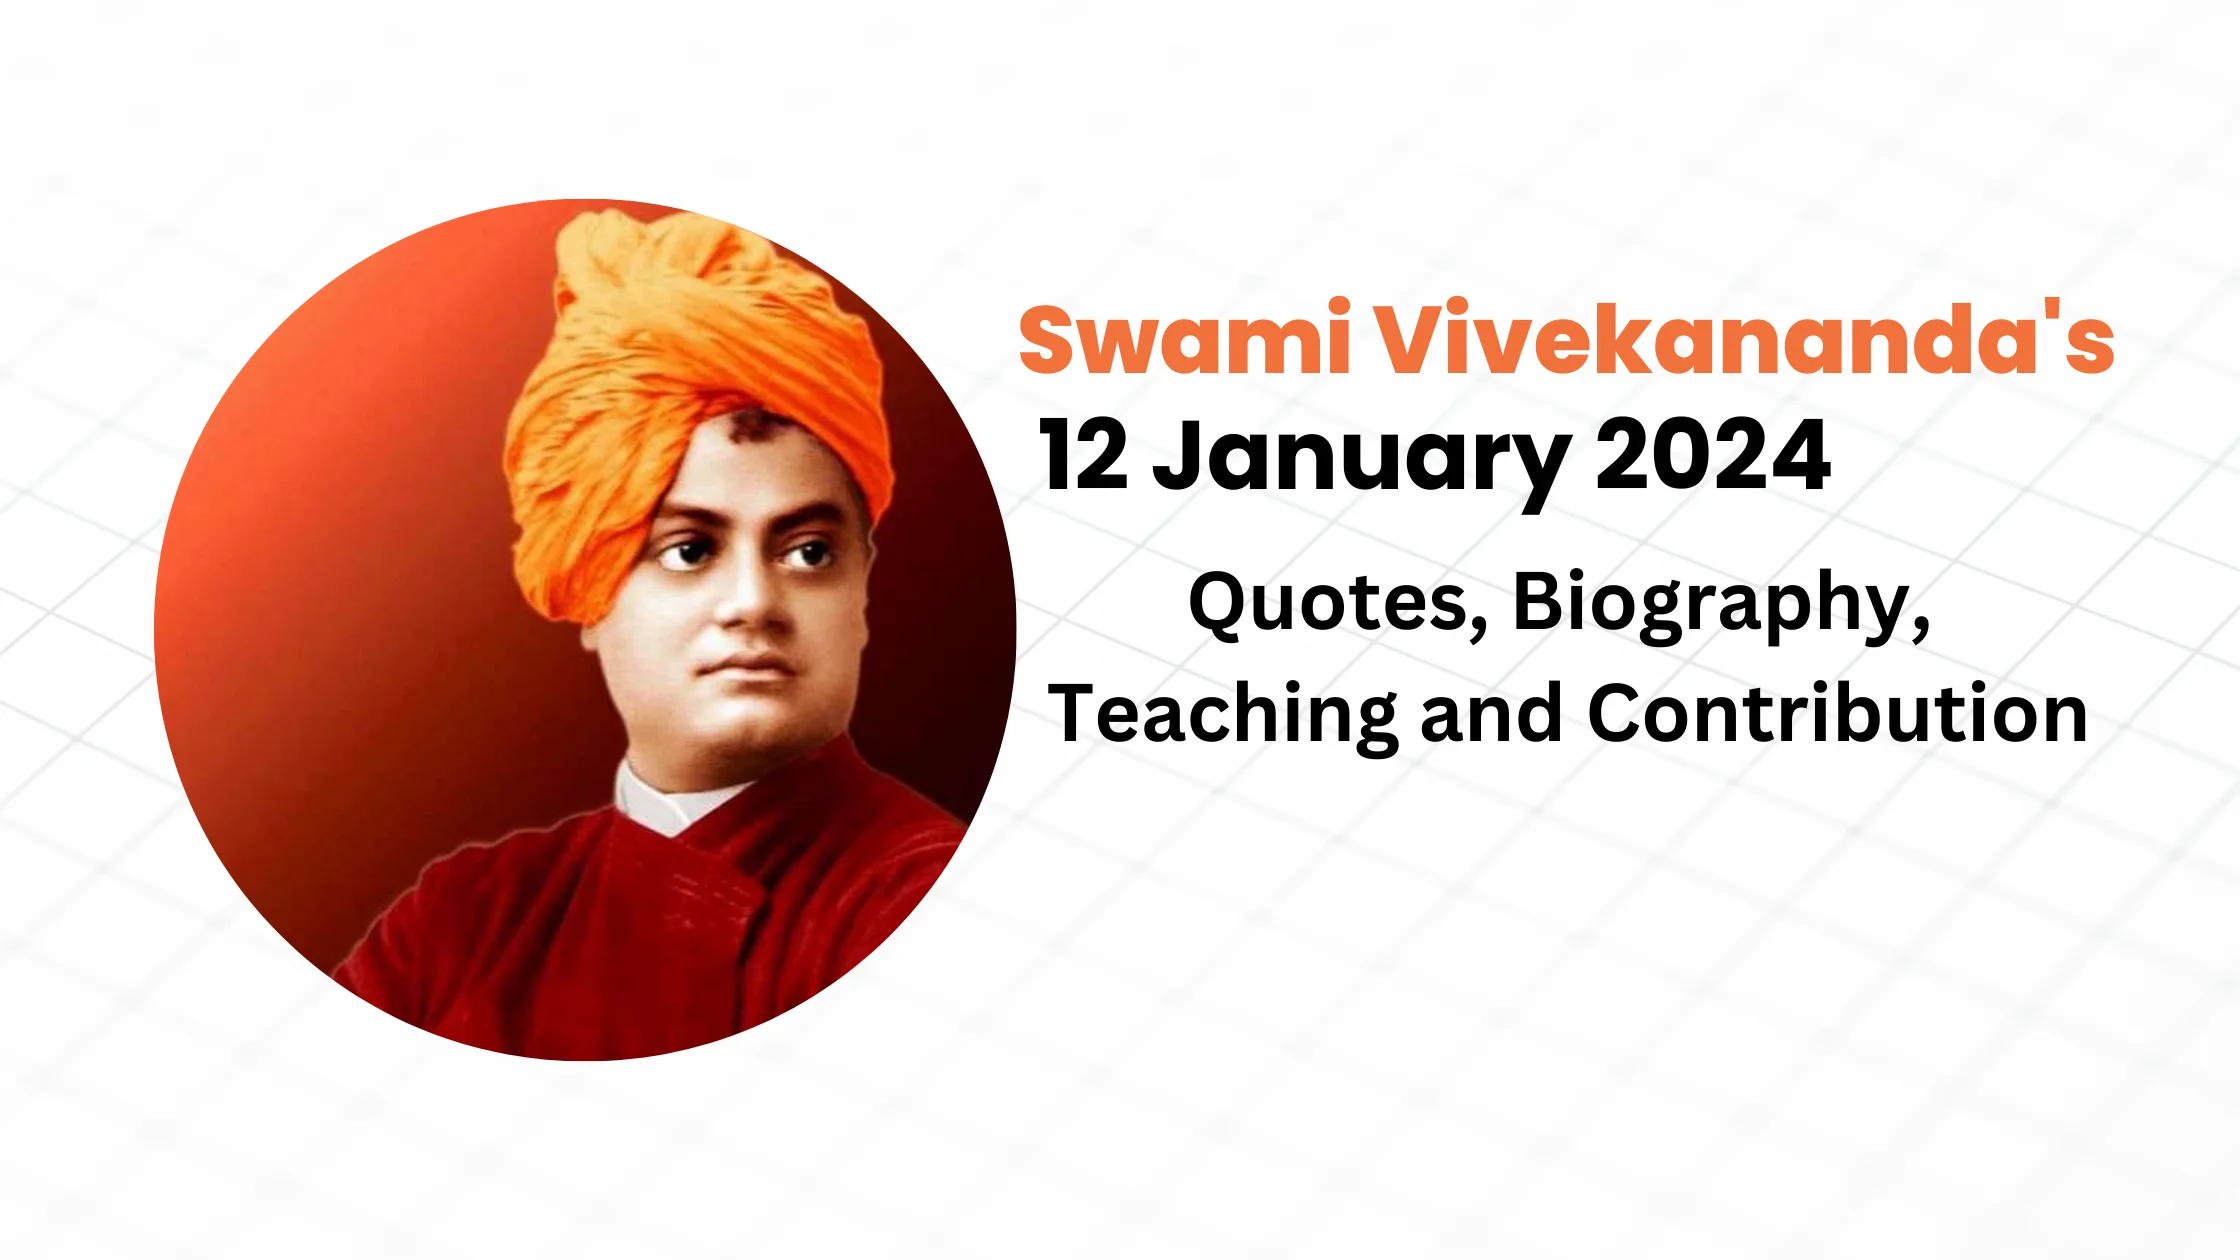 Swami Vivekananda’s 12 January 2024 Jayanti, Quotes, Biography, Teachings, and Contributions: Inspiring Excellence